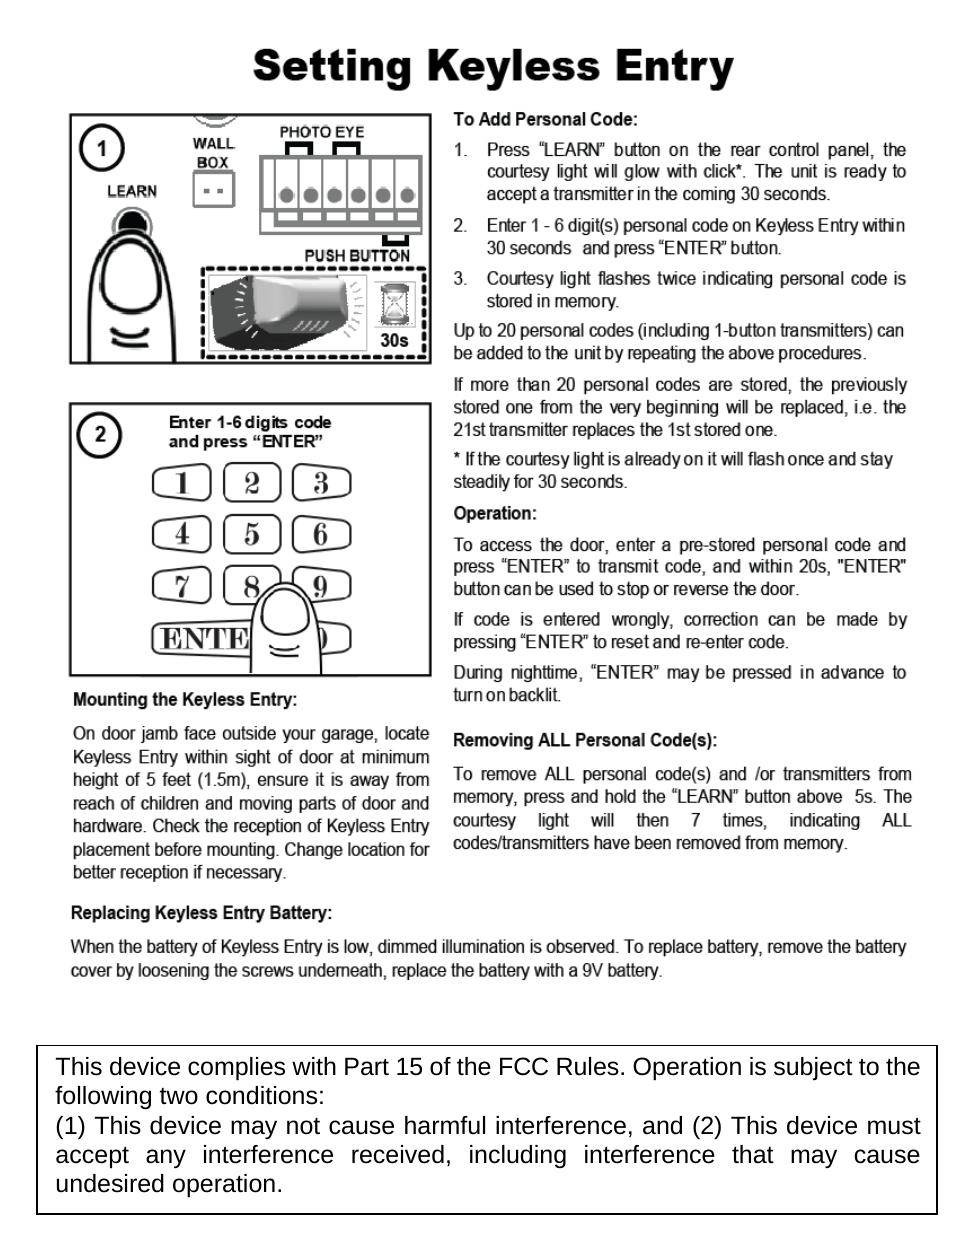   This device complies with Part 15 of the FCC Rules. Operation is subject to the following two conditions: (1) This device may not cause harmful interference, and (2) This device must accept any interference received, including interference that may cause undesired operation.        